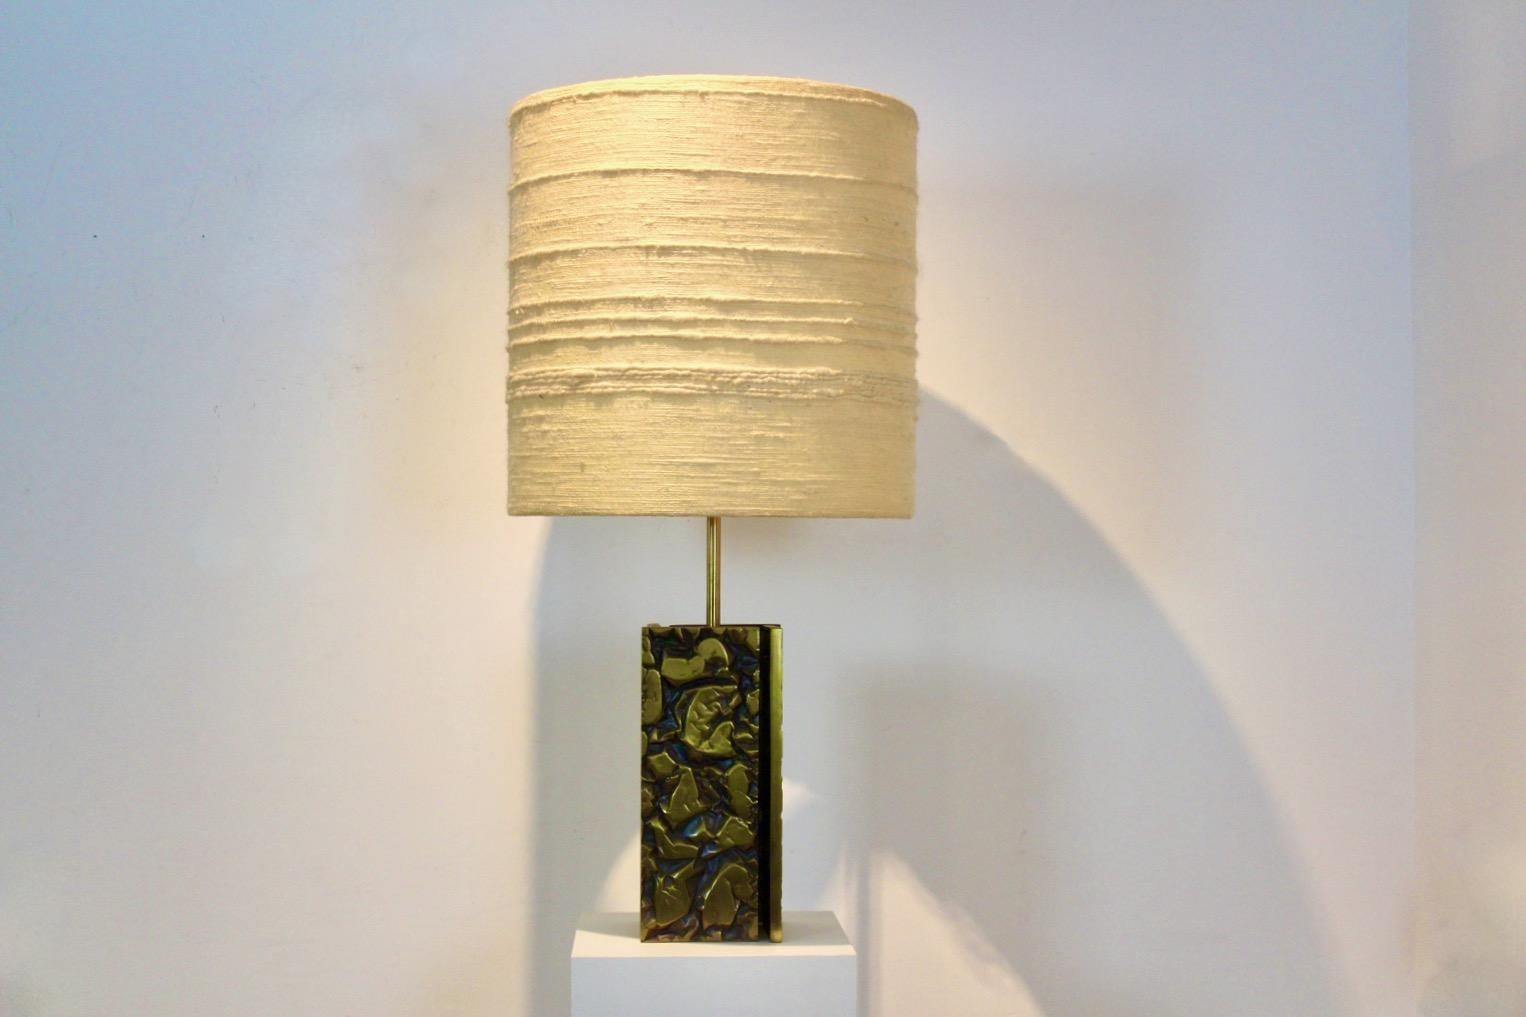 Expressive Brutalist table lamp made in France. Beautiful heavy and Large lamp base with Bold Abstract Brass Sculptured accents. Comes with a matching original Raw Woolen structured shade. Completely fine original version. Very good vintage